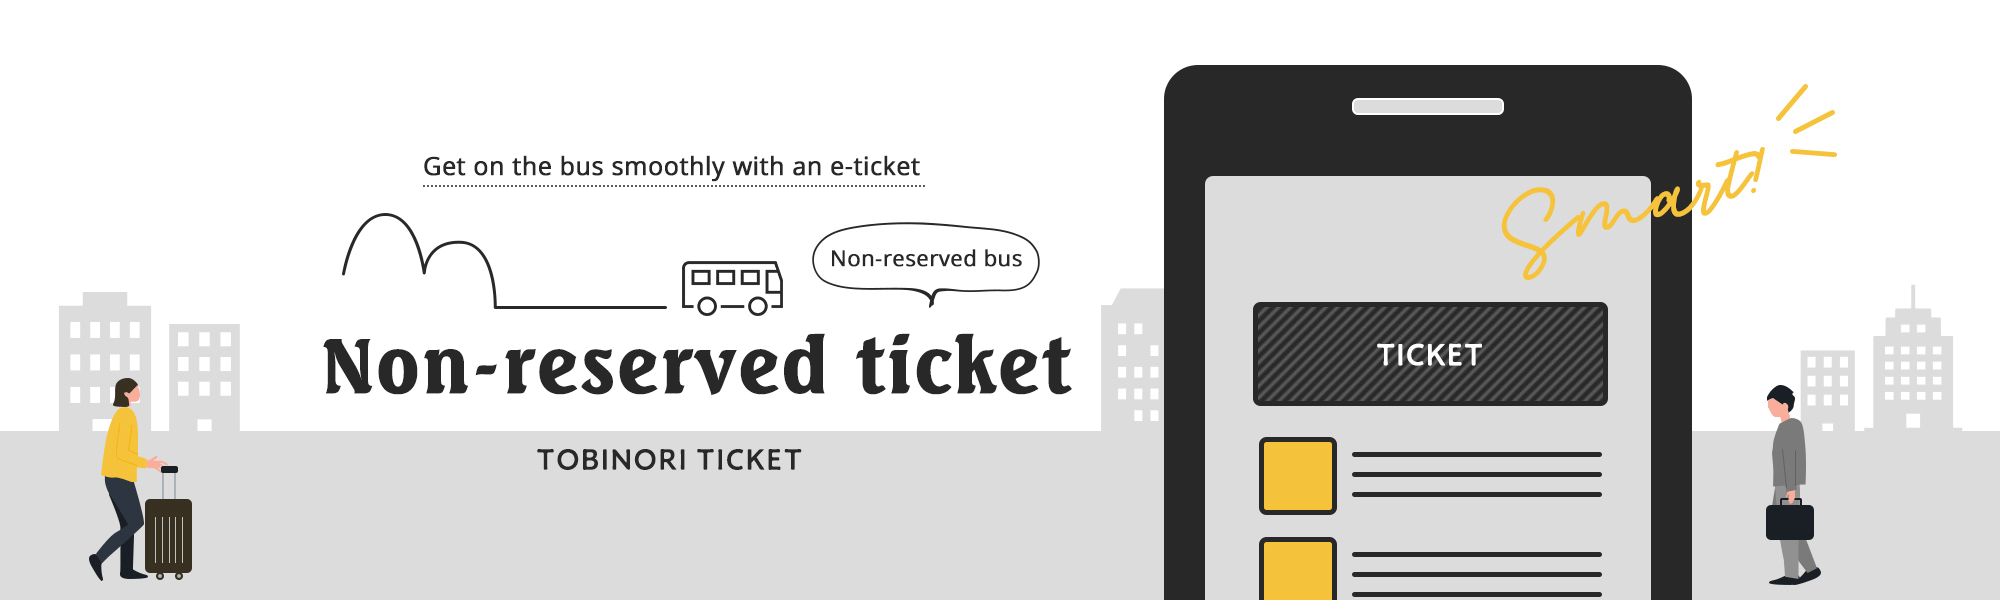 Non-reserved ticket